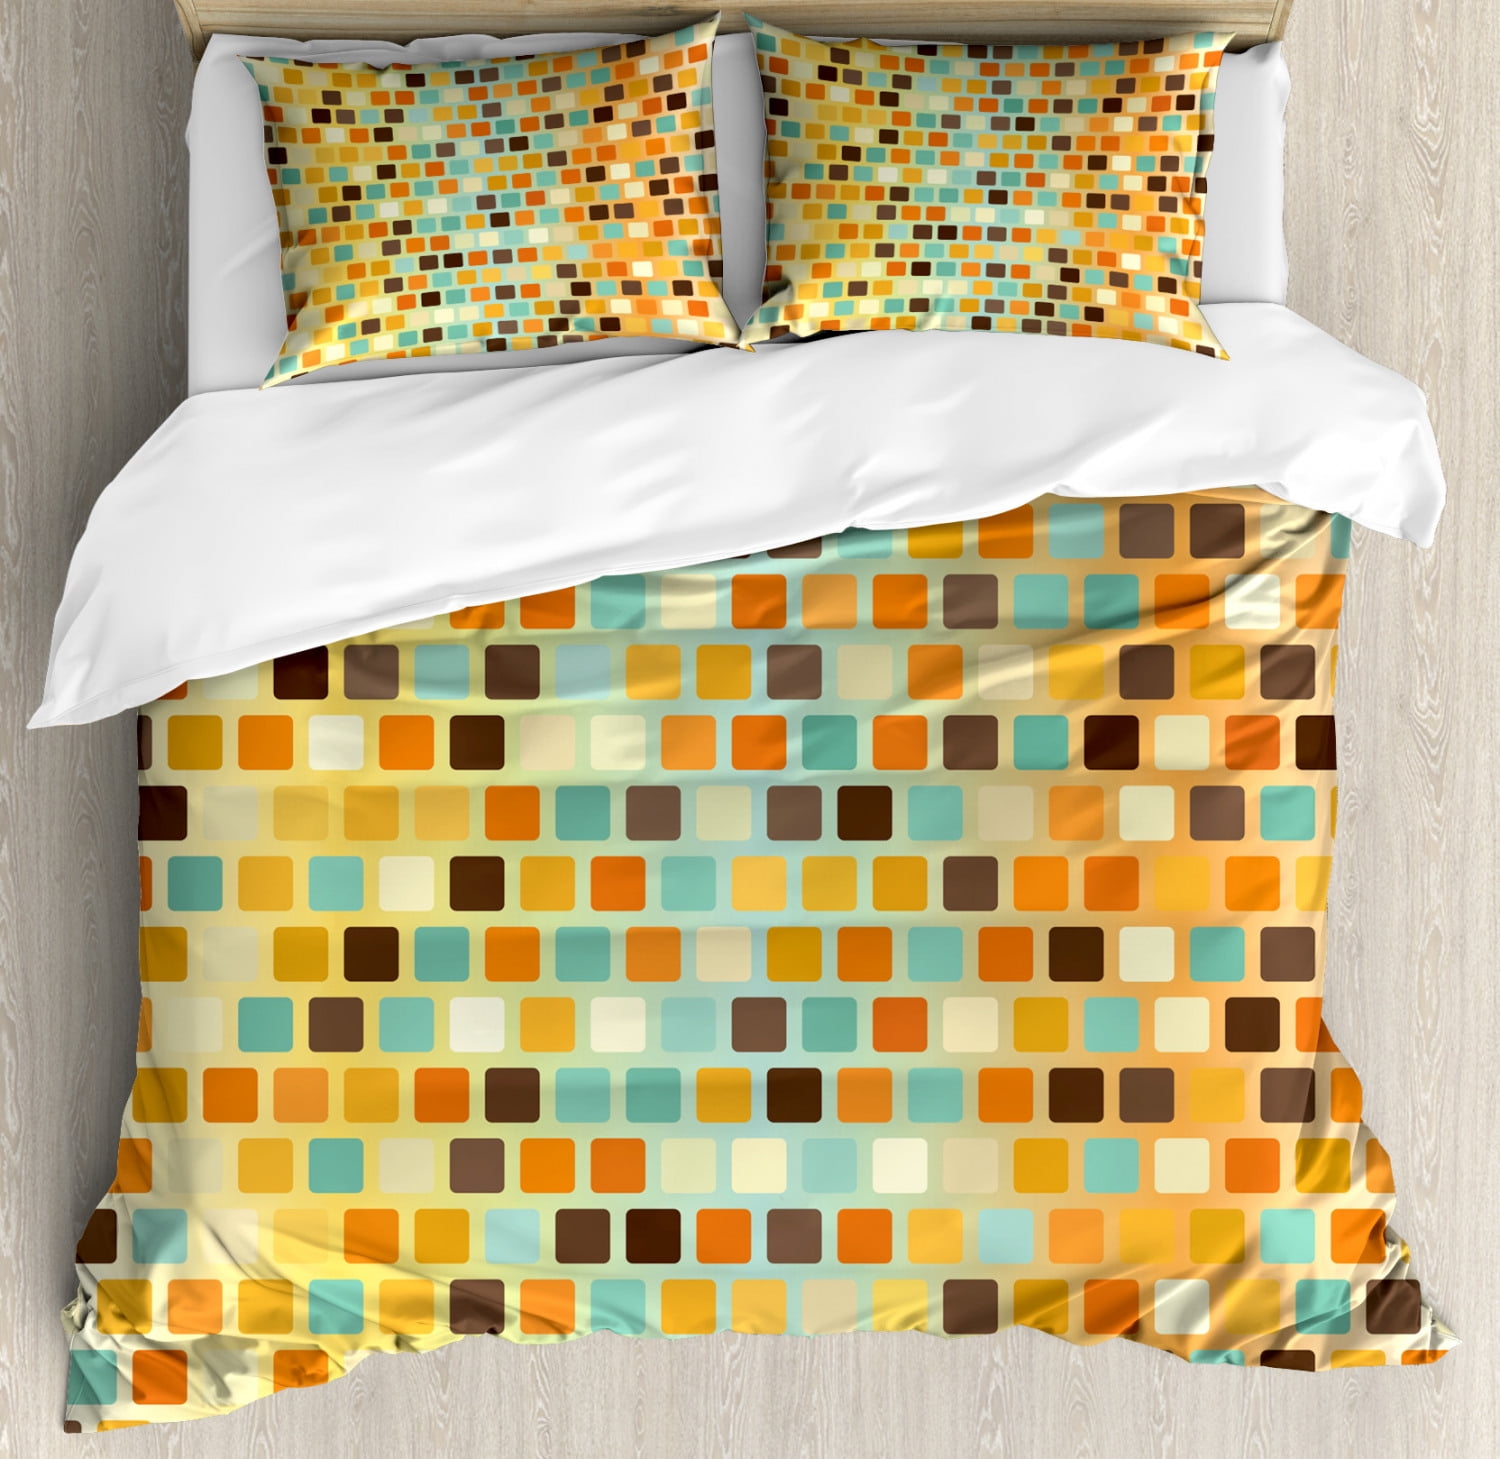 Retro King Size Duvet Cover Set Square Wall Pattern With Colorful